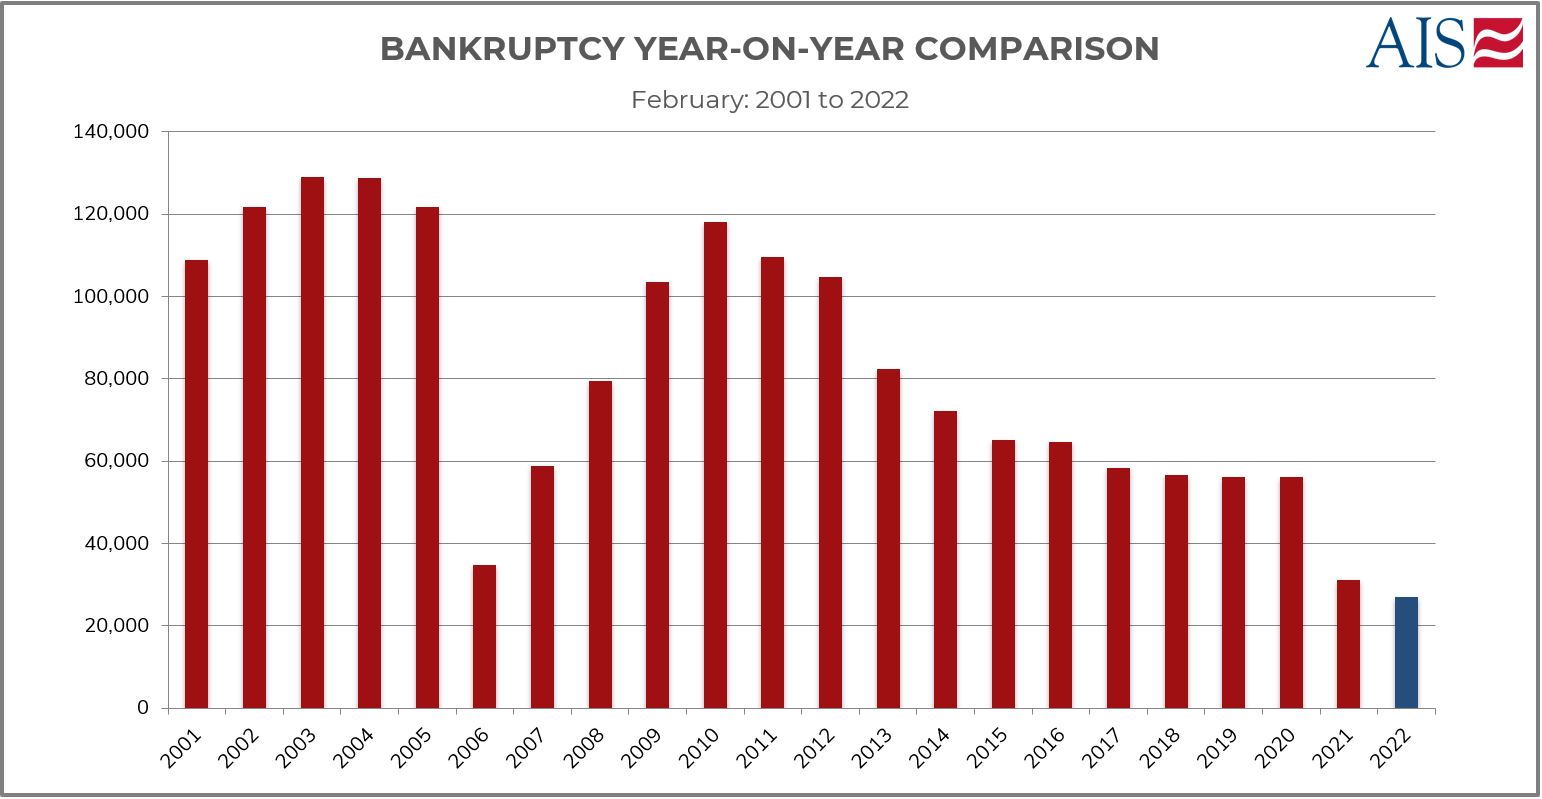 AIS Insight_February 2022_BANKRUPTCY YEAR ON YEAR COMPARISON-1